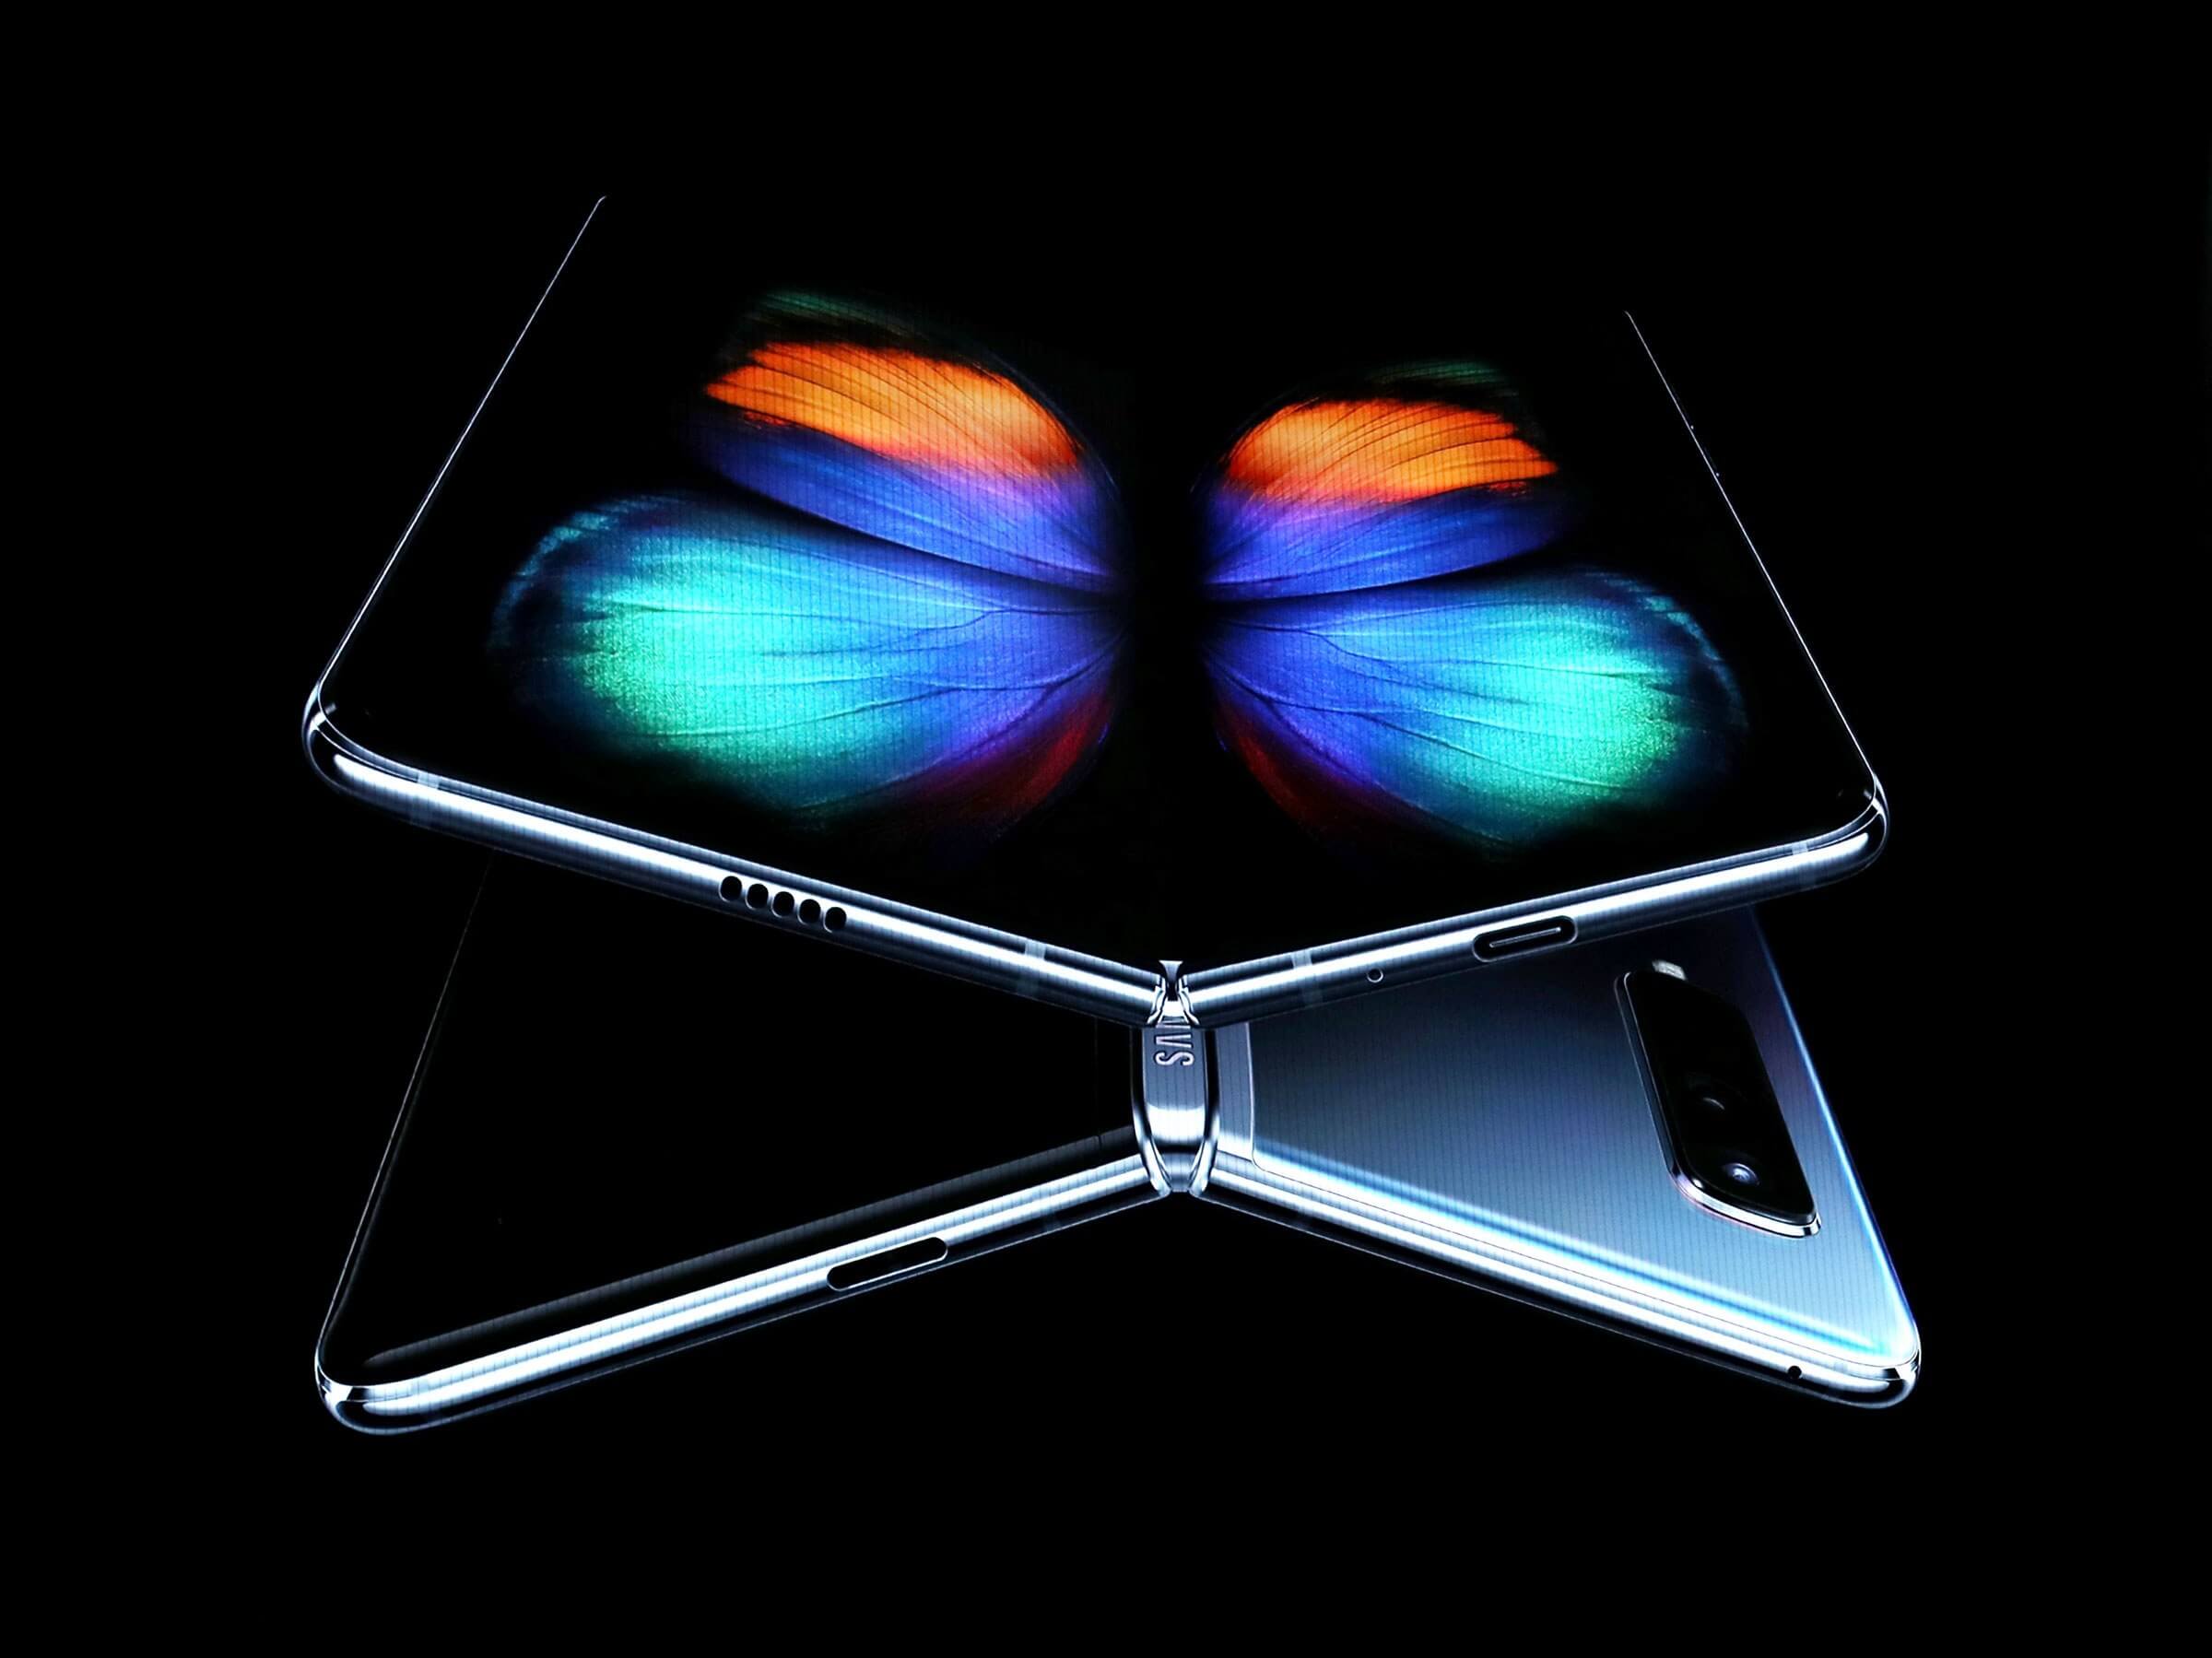 Samsung will reveal the Galaxy Fold's new release date in the coming weeks